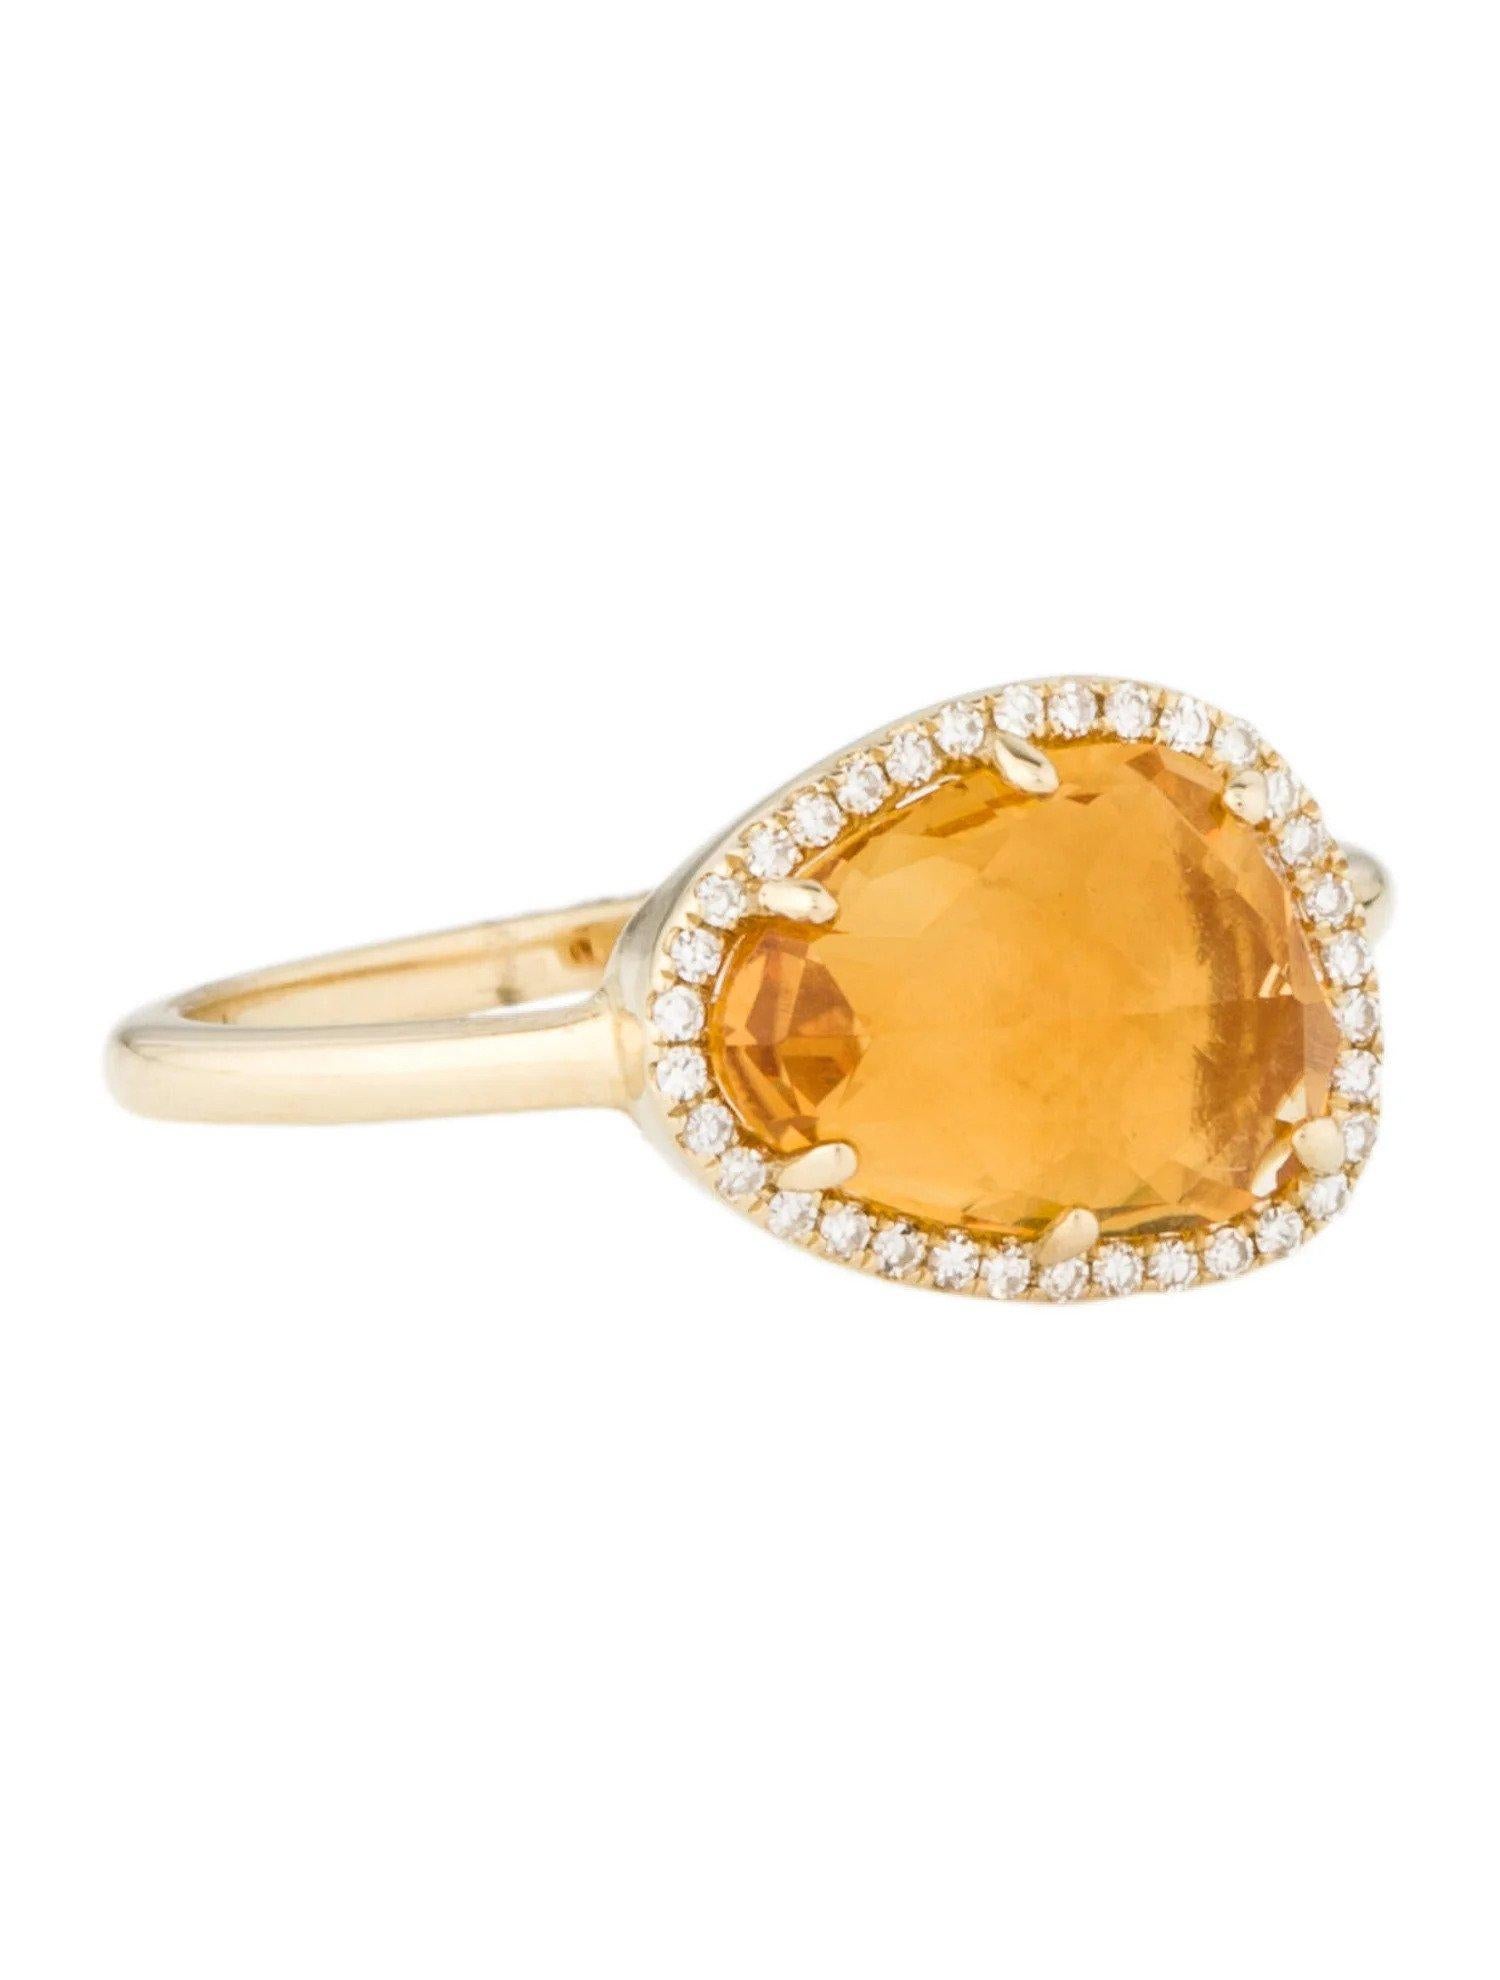 Mixed Cut 2.03 Carat Citrine & Diamond Yellow Gold Ring For Sale